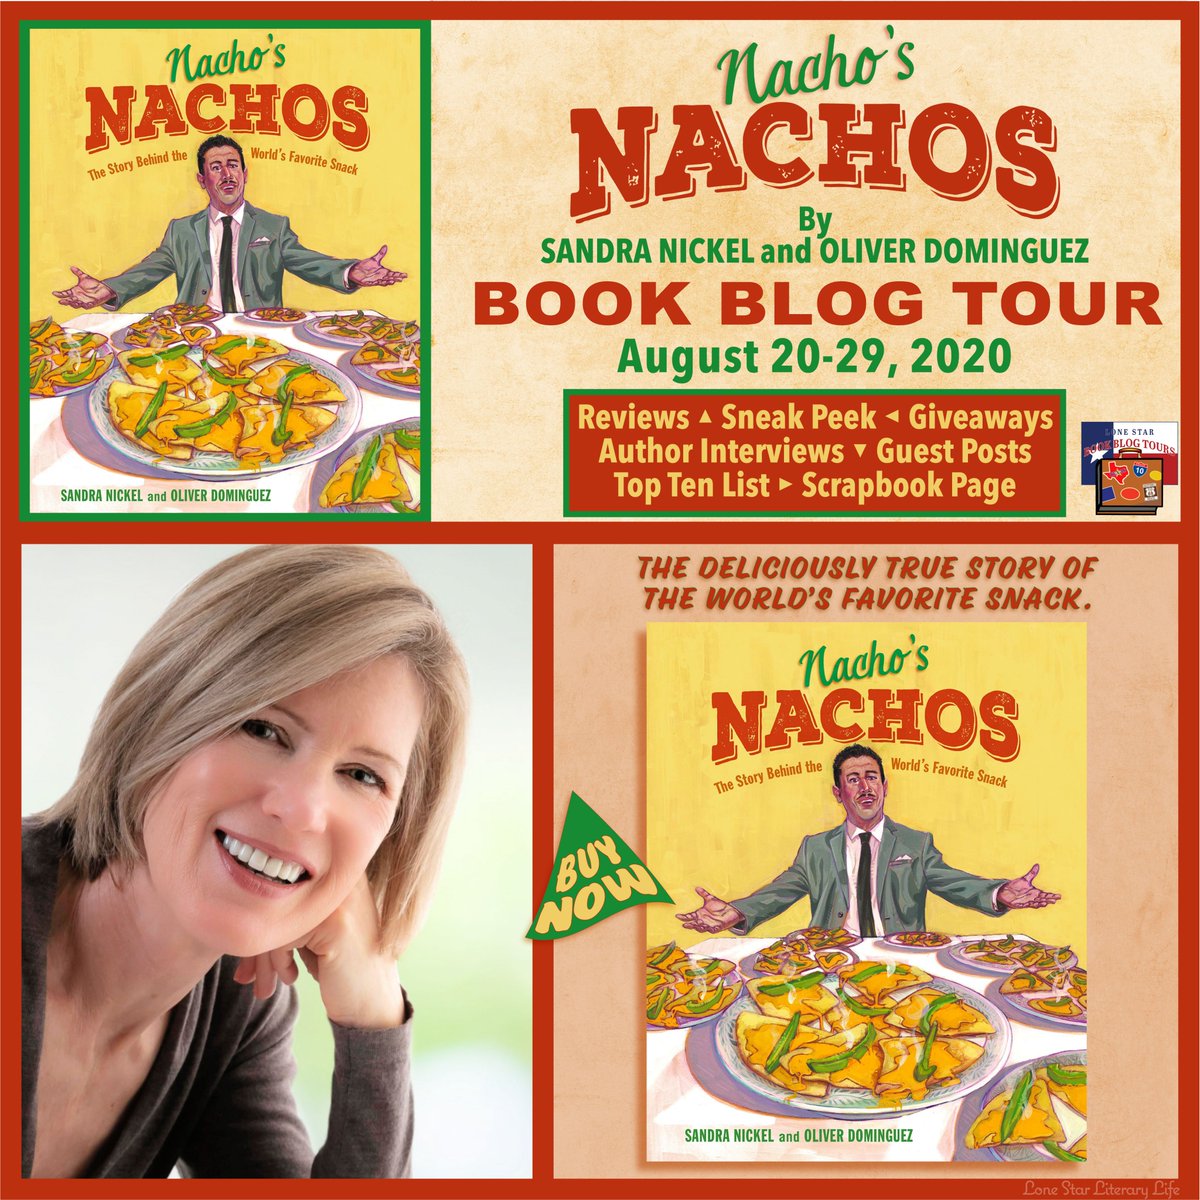 'This story is compelling and a fun celebration of the #MexicanHeritage of nachos.' @BookBustle shares her #BookReview & your chance to #WIN NACHO'S NACHOS by @senickel on the #LoneStarLit Tour. Check it out! #foodhistory #nachos #middlegrade @LEEandLOW 

bookbustle.com/2020/08/22/blo…